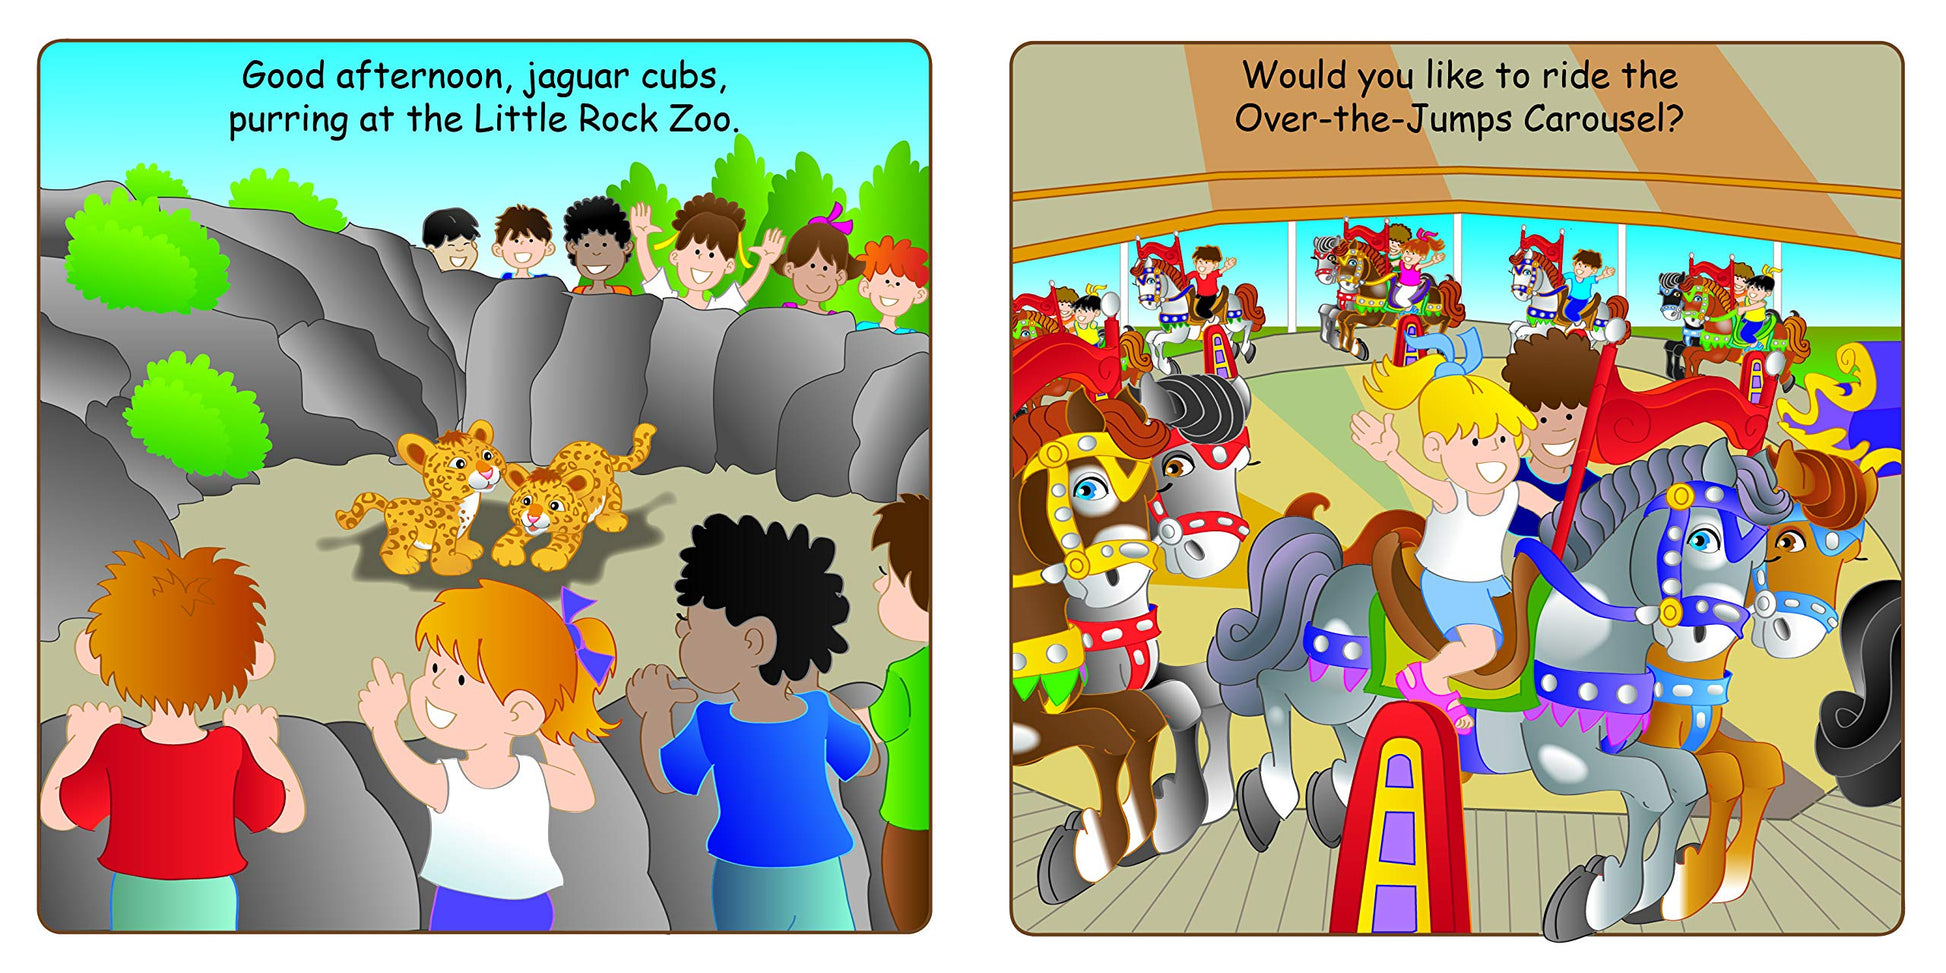 third set of pages with kids looking at jaguars at a zoo, the next with kids riding a carousel, and text